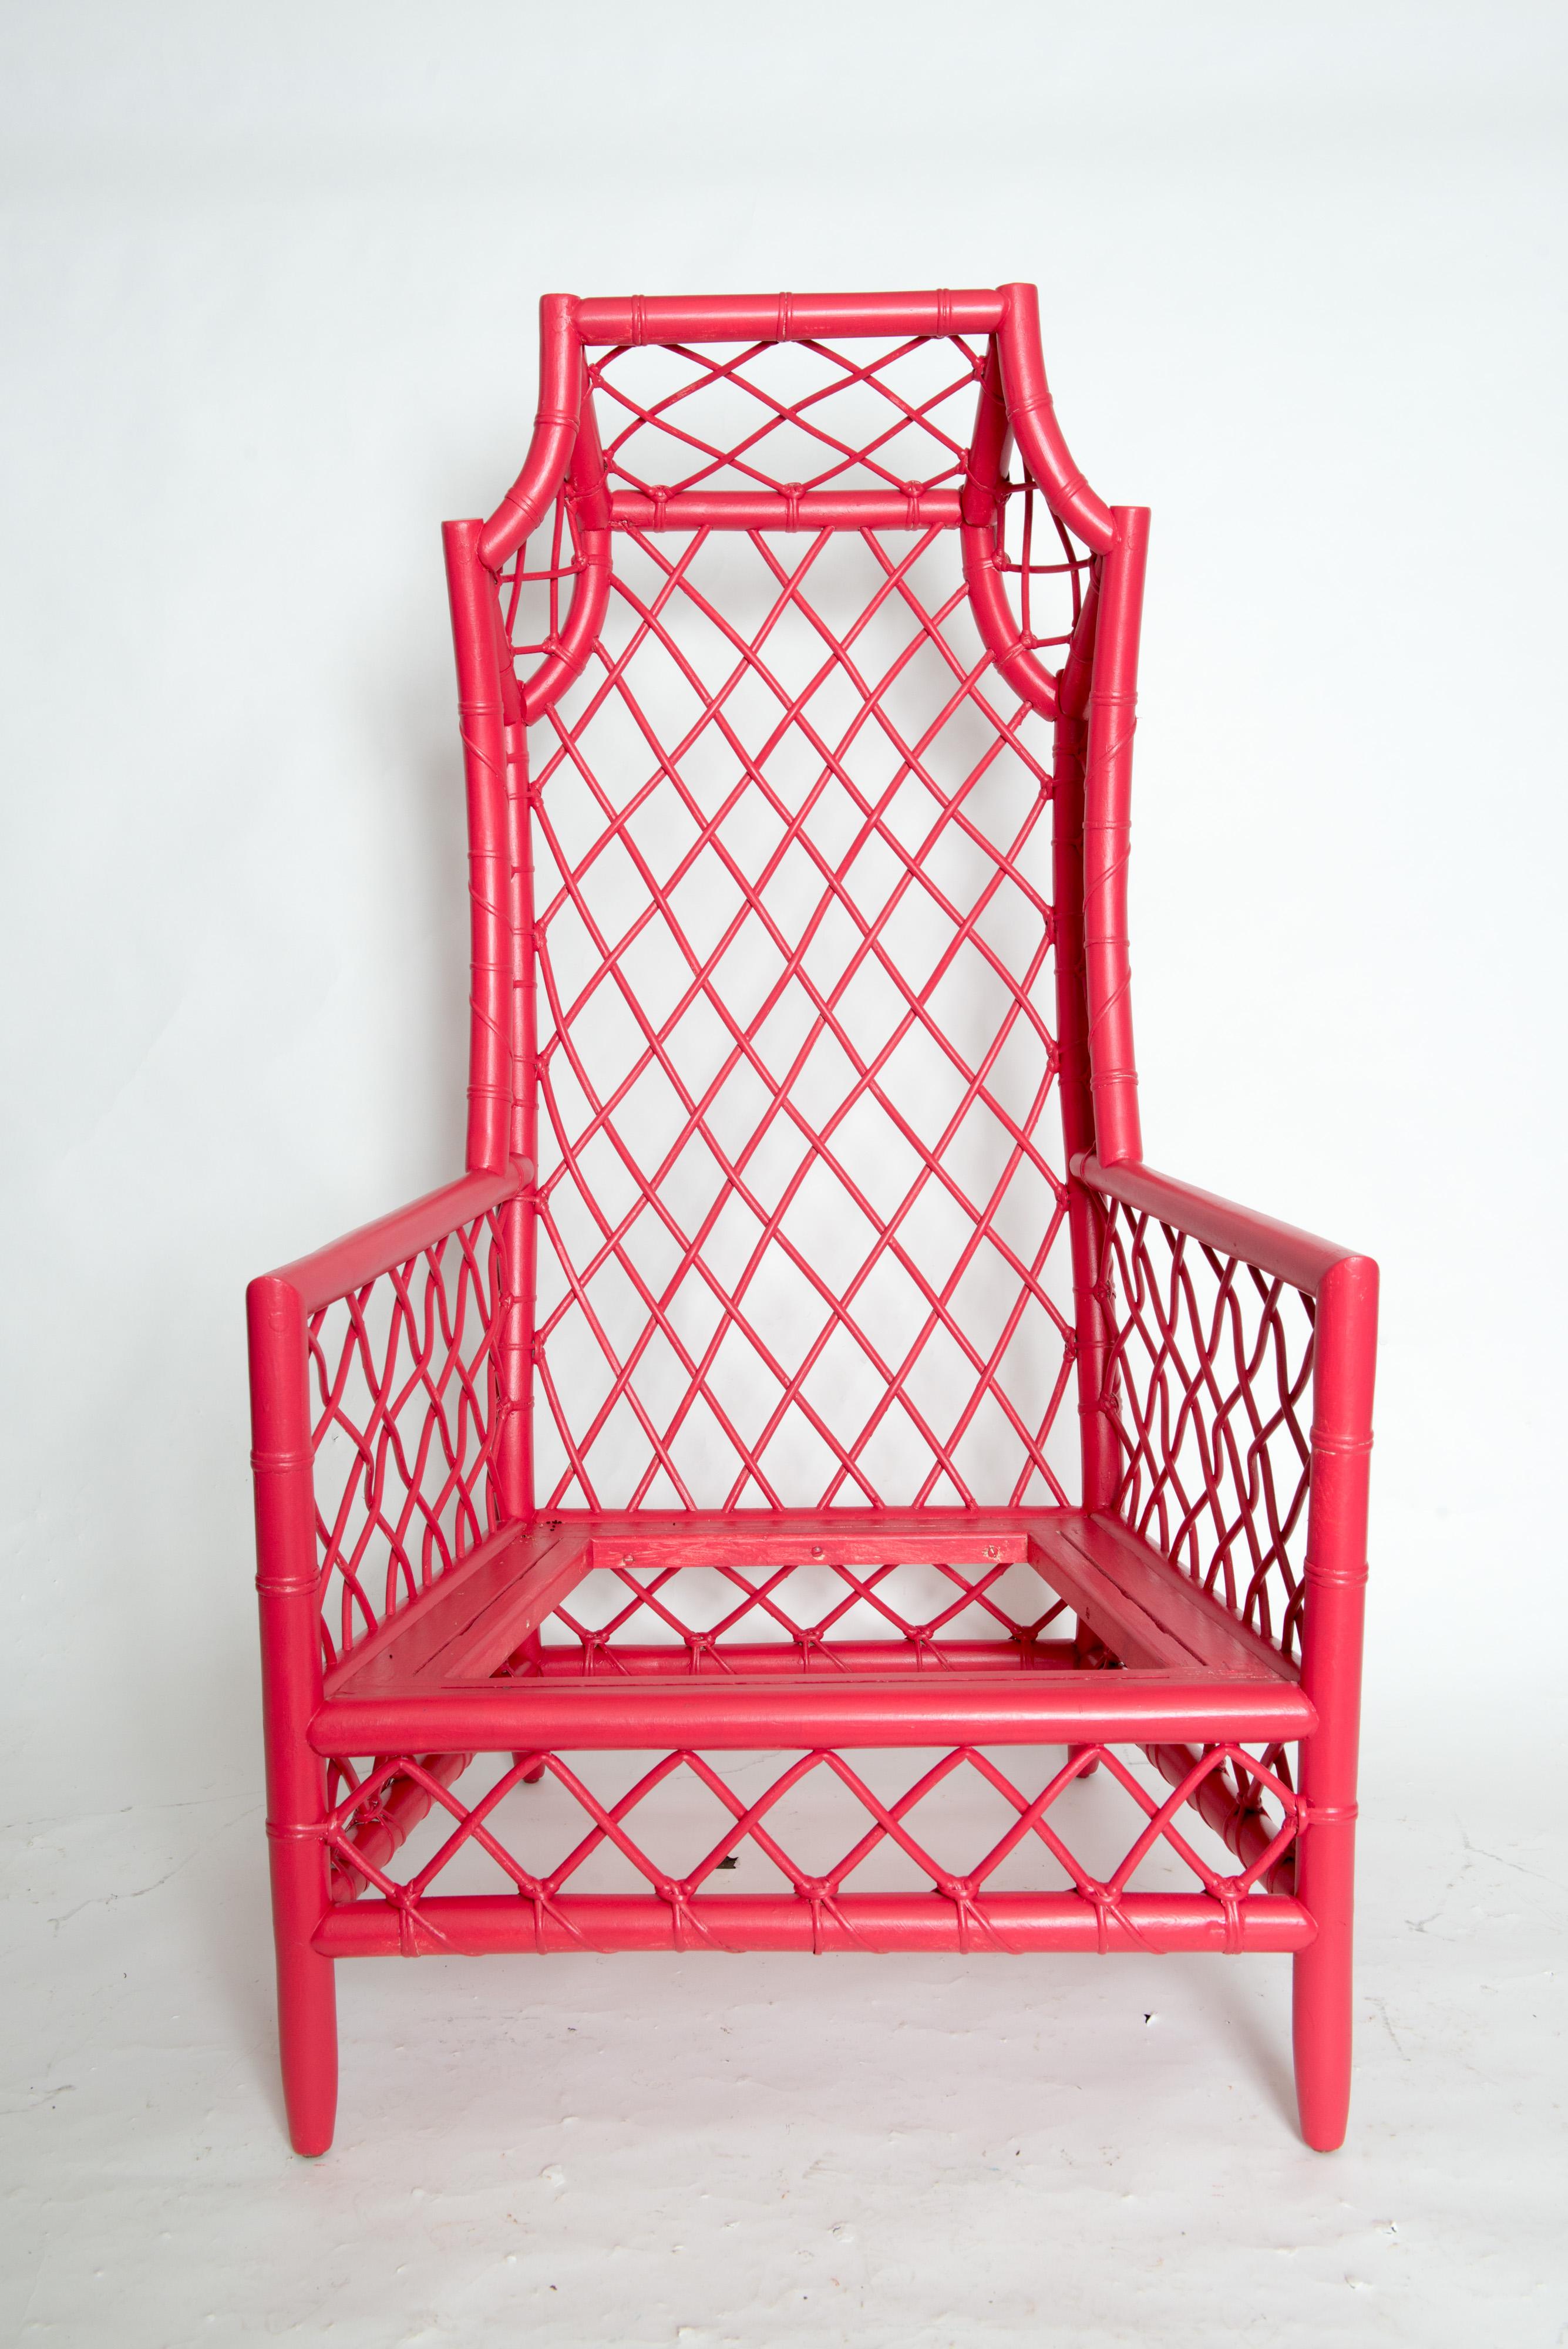 High back Chinese red rattan porter's chair or canopy chair from Miami based Empire Rattan Company. A wonderful accent chair with diamond shaped woven rattan design on front, sides, back and hood. Ready for your upholstered seat.